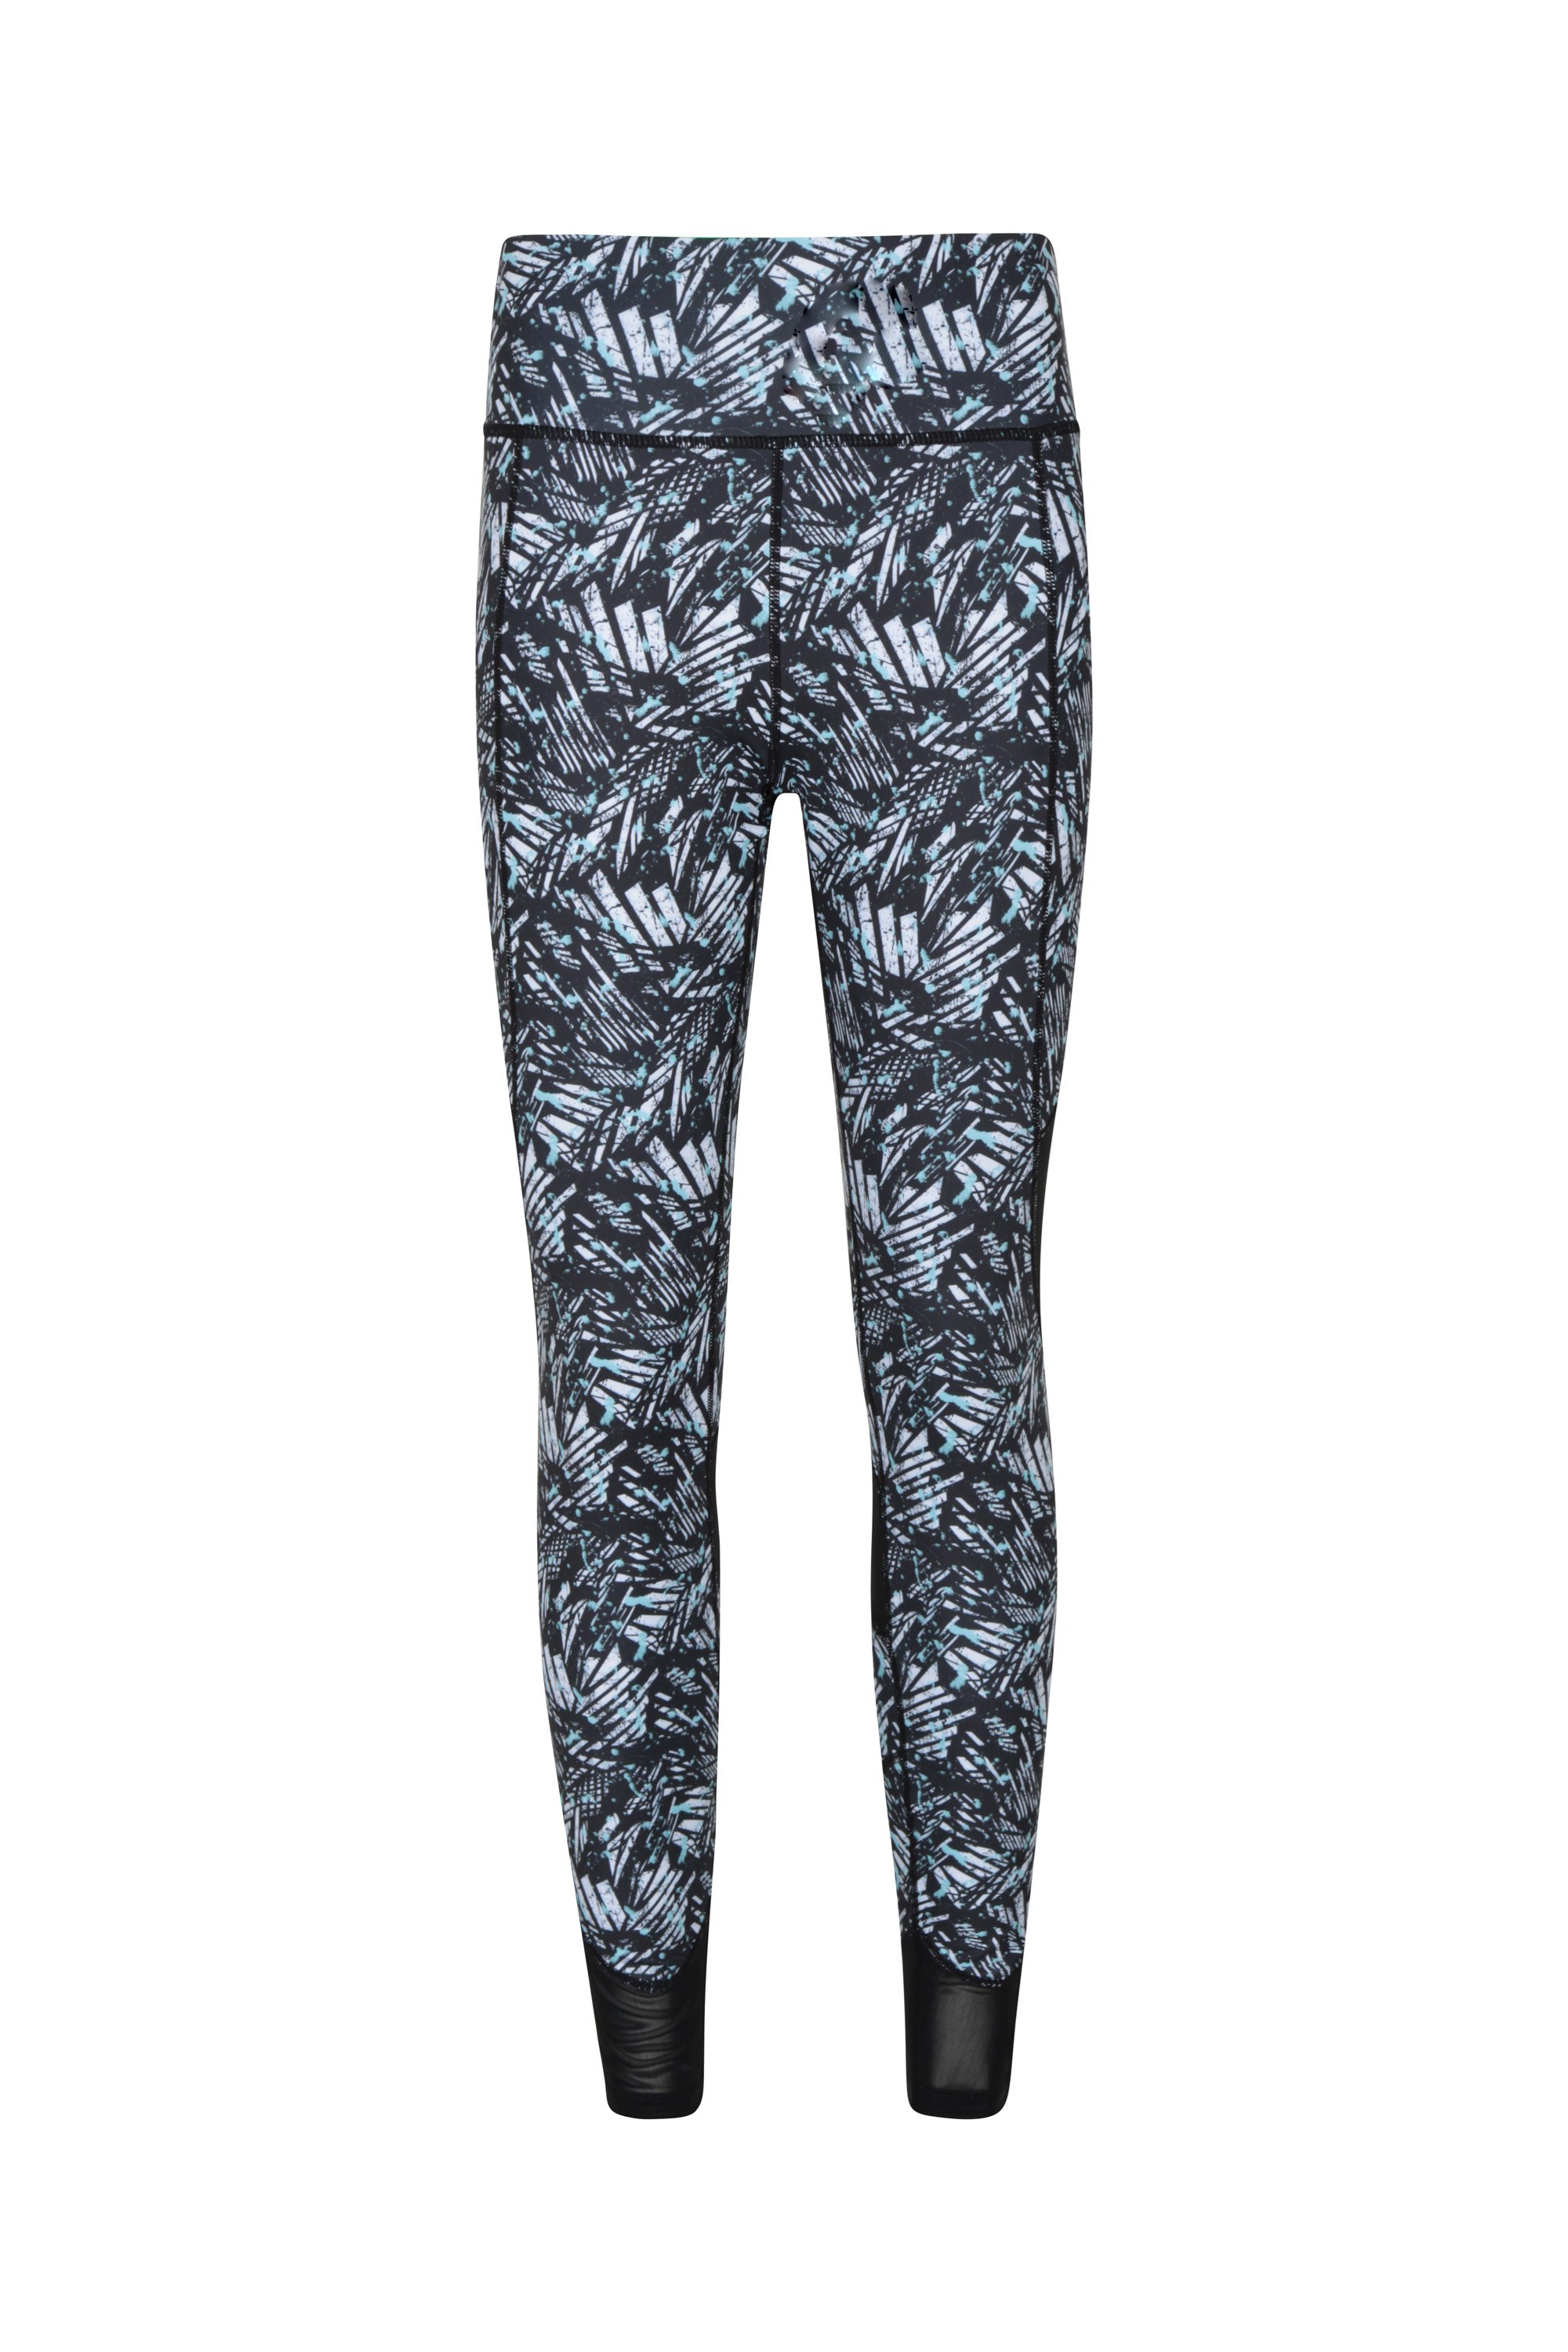 Mountain Warehouse Mountain Warehouse  Patterned Paneled High Waisted Womens Leggings In 